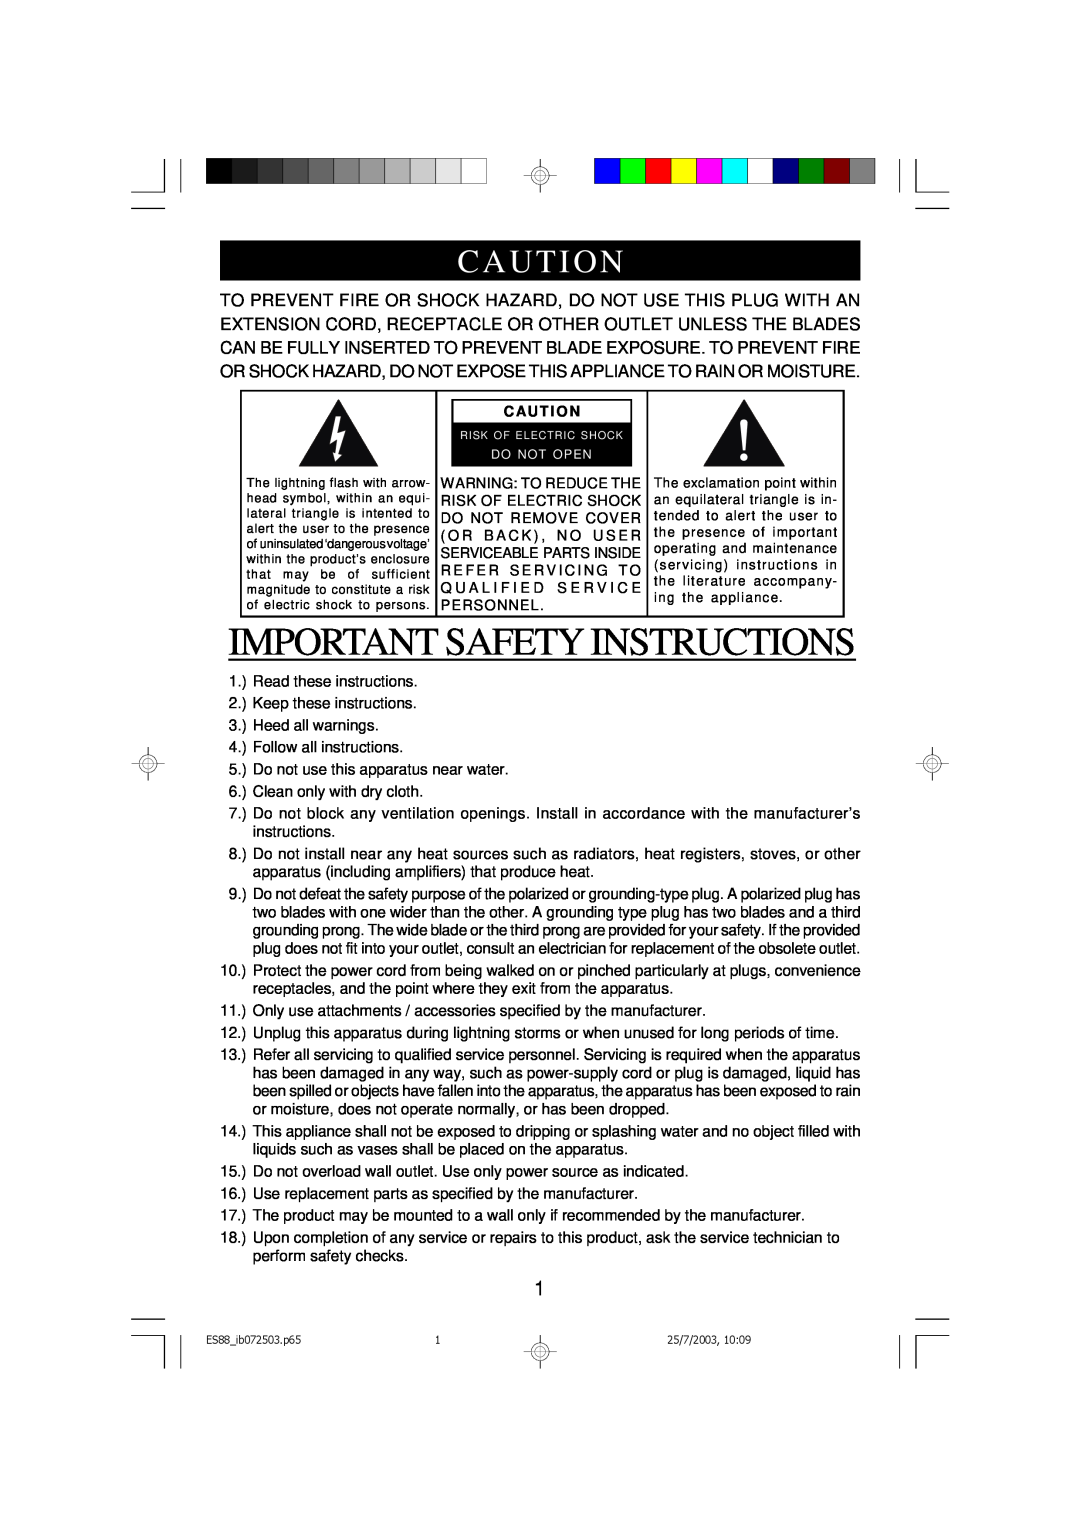 Emerson ES88 owner manual Important Safety Instructions, Caut I On, Caut I O N 